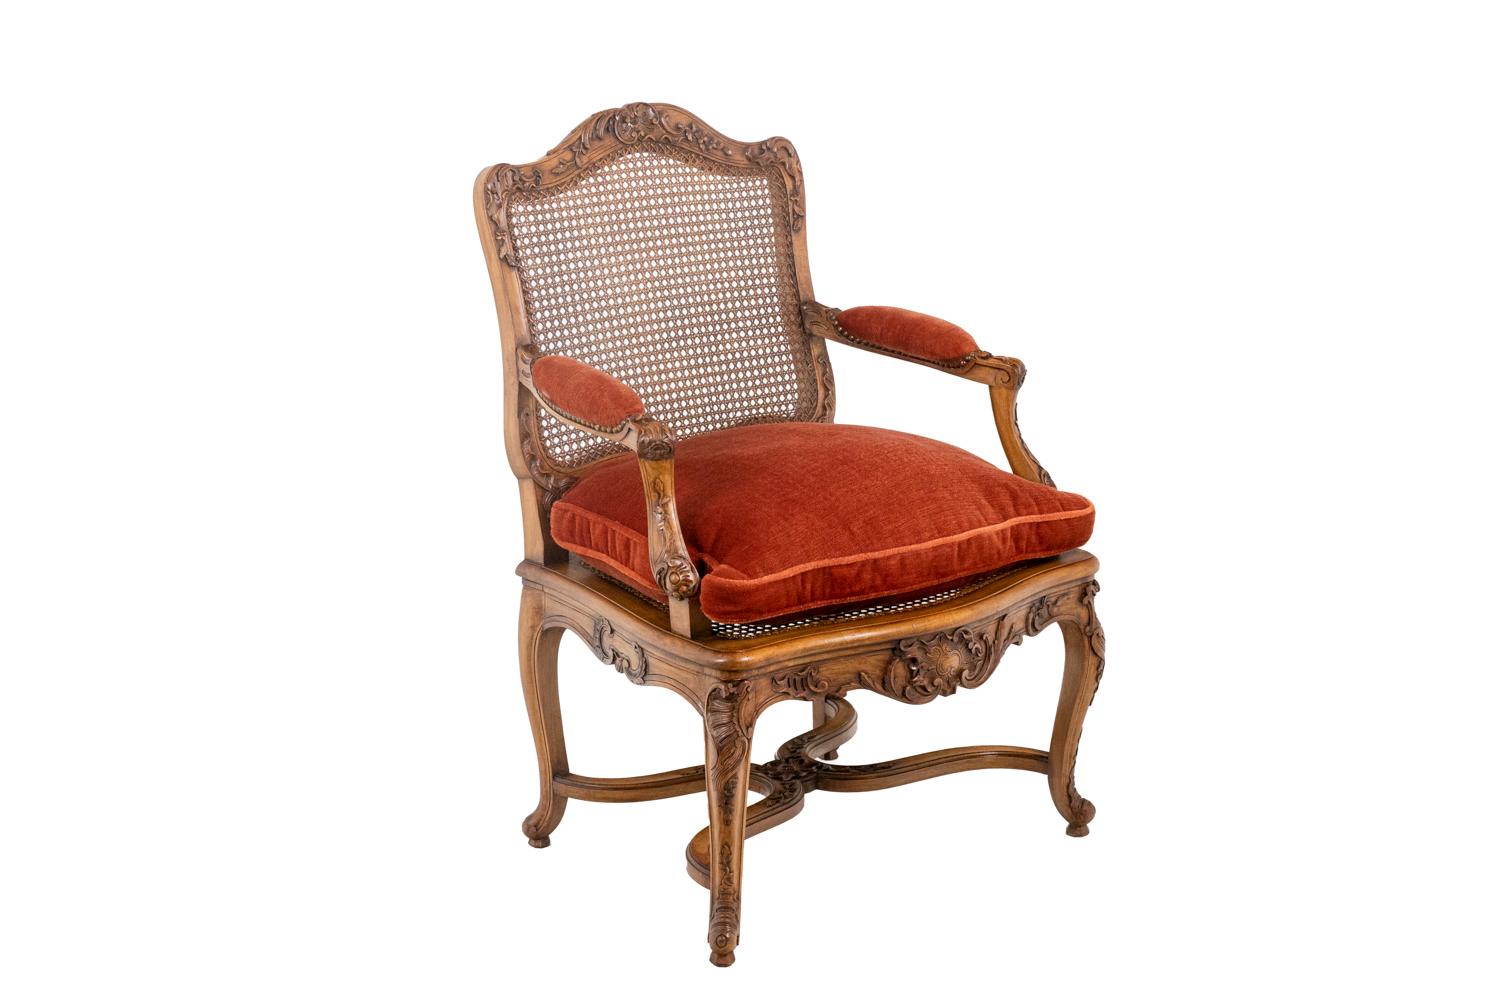 Jean Mocqué, stamp.
Louis Cresson, in the style of. 

Pair of Regency style armchairs in beech. Cane back and seat. Backrest and belt adorned with flowers, foliage and shells. Armrests consoles set back from the line of the foot. Arched feet joined